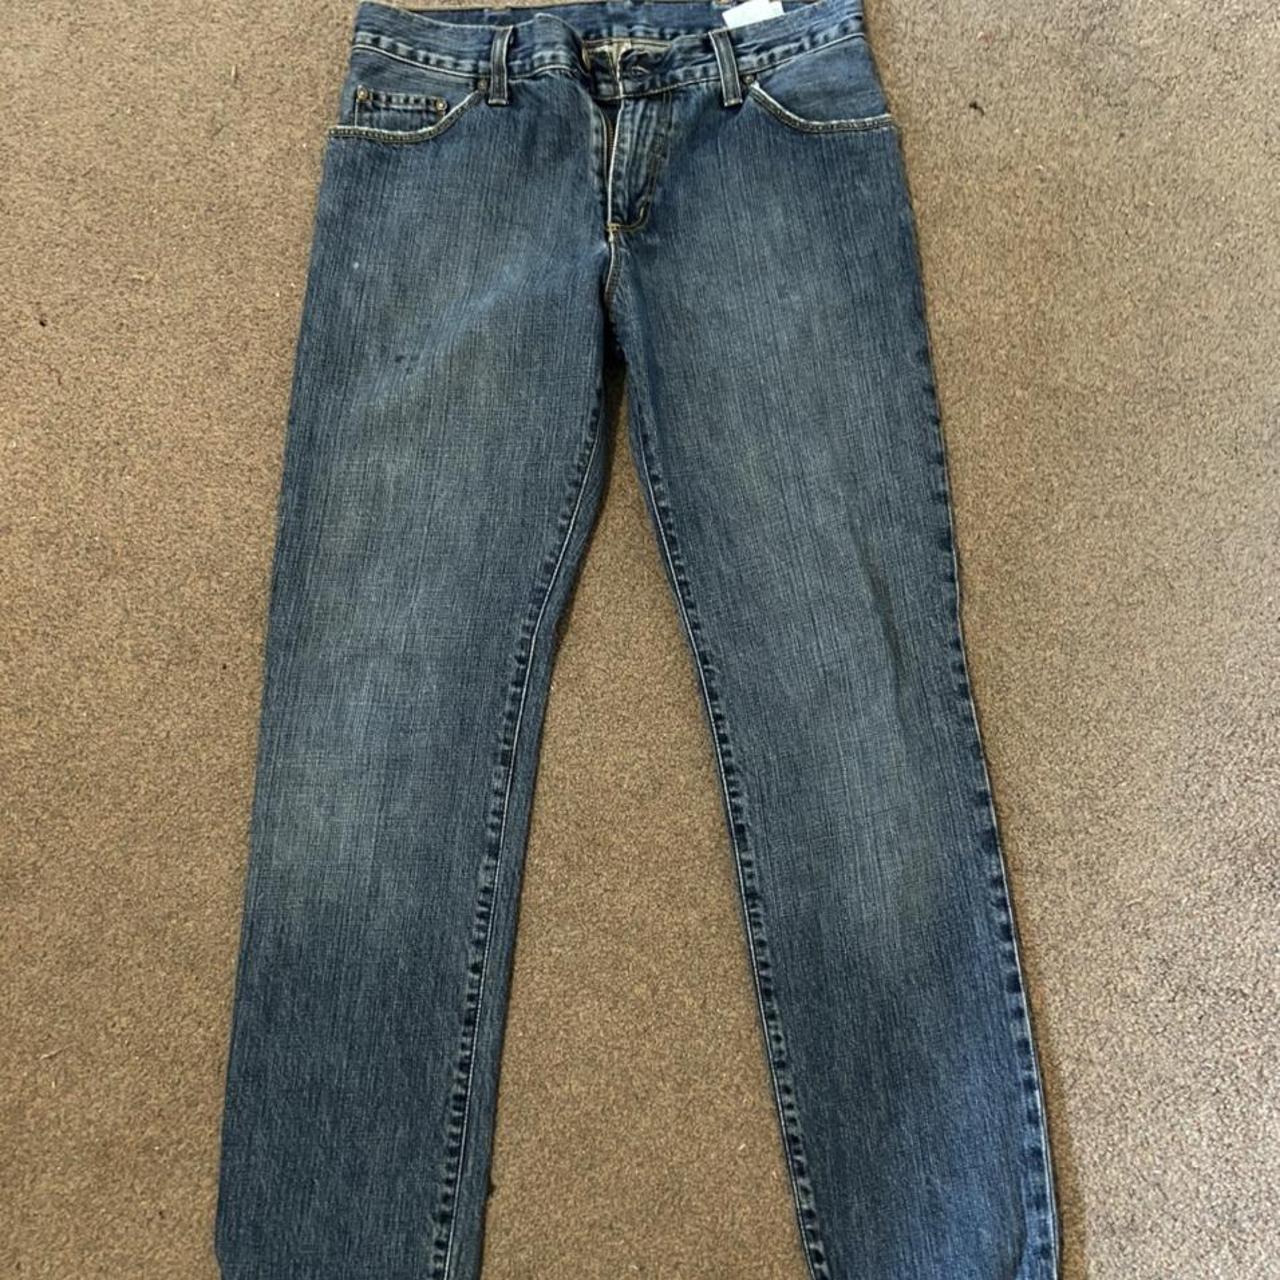 Carhartt Jeans 30W 32L - Used but in Very Good... - Depop